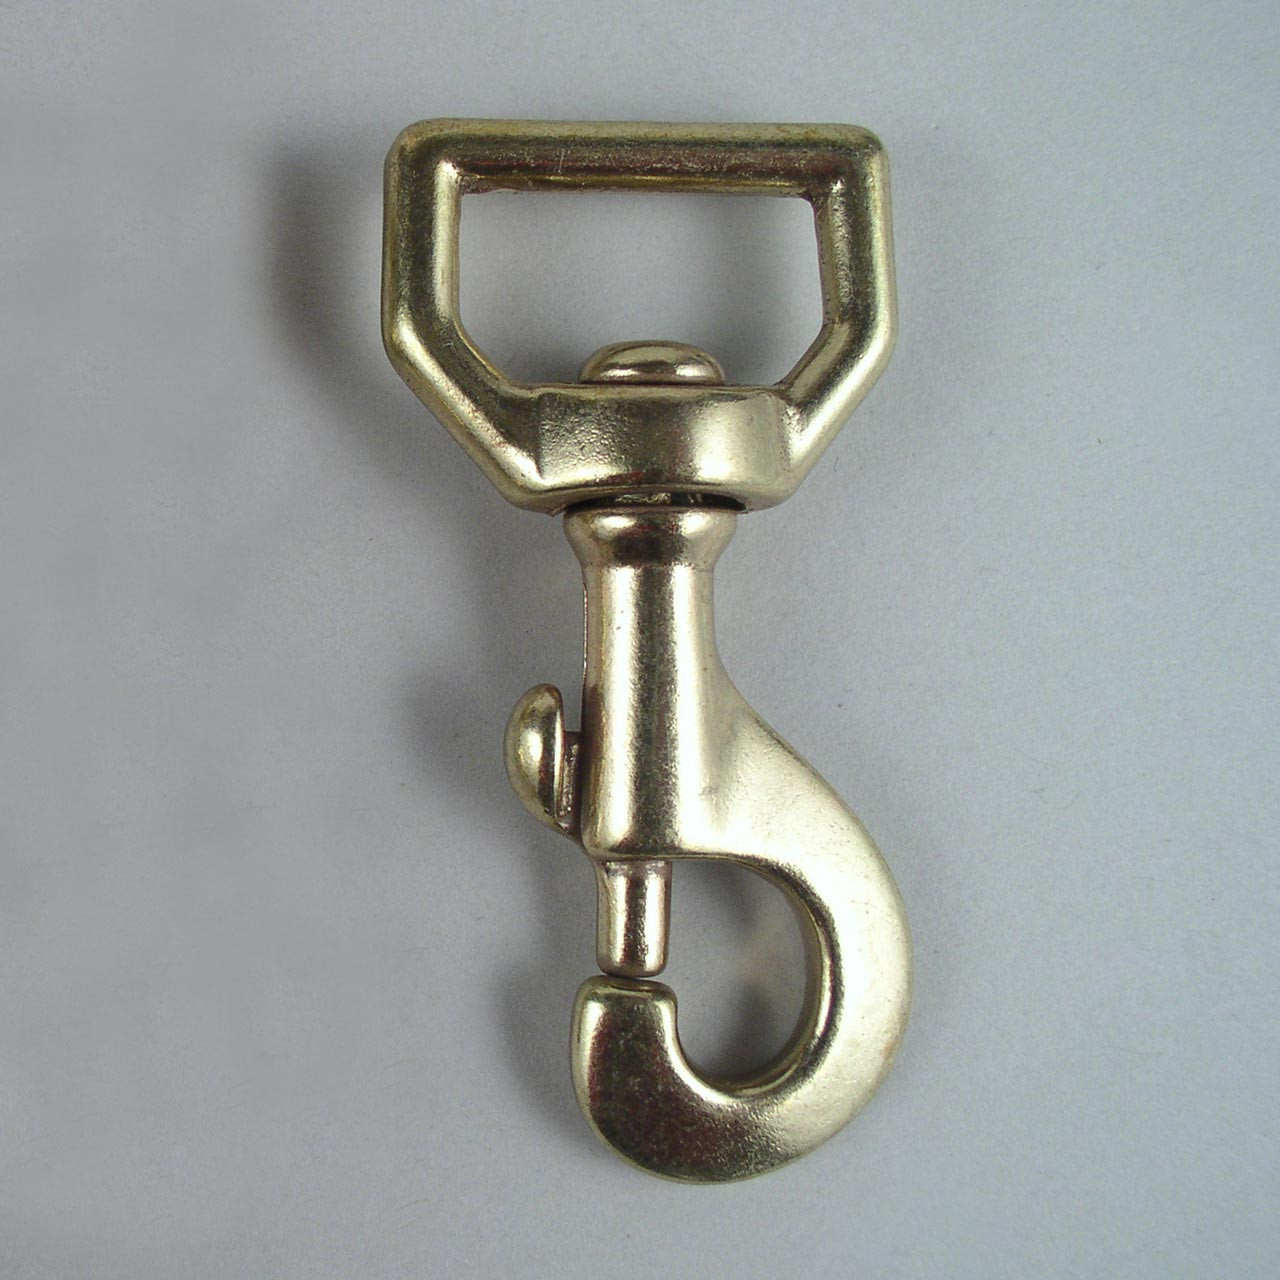 https://cdn11.bigcommerce.com/s-67hz0xd/images/stencil/1280x1280/products/849/1015/one_inch_brass_flat_large_swivel__85464.1384972789.jpg?c=2